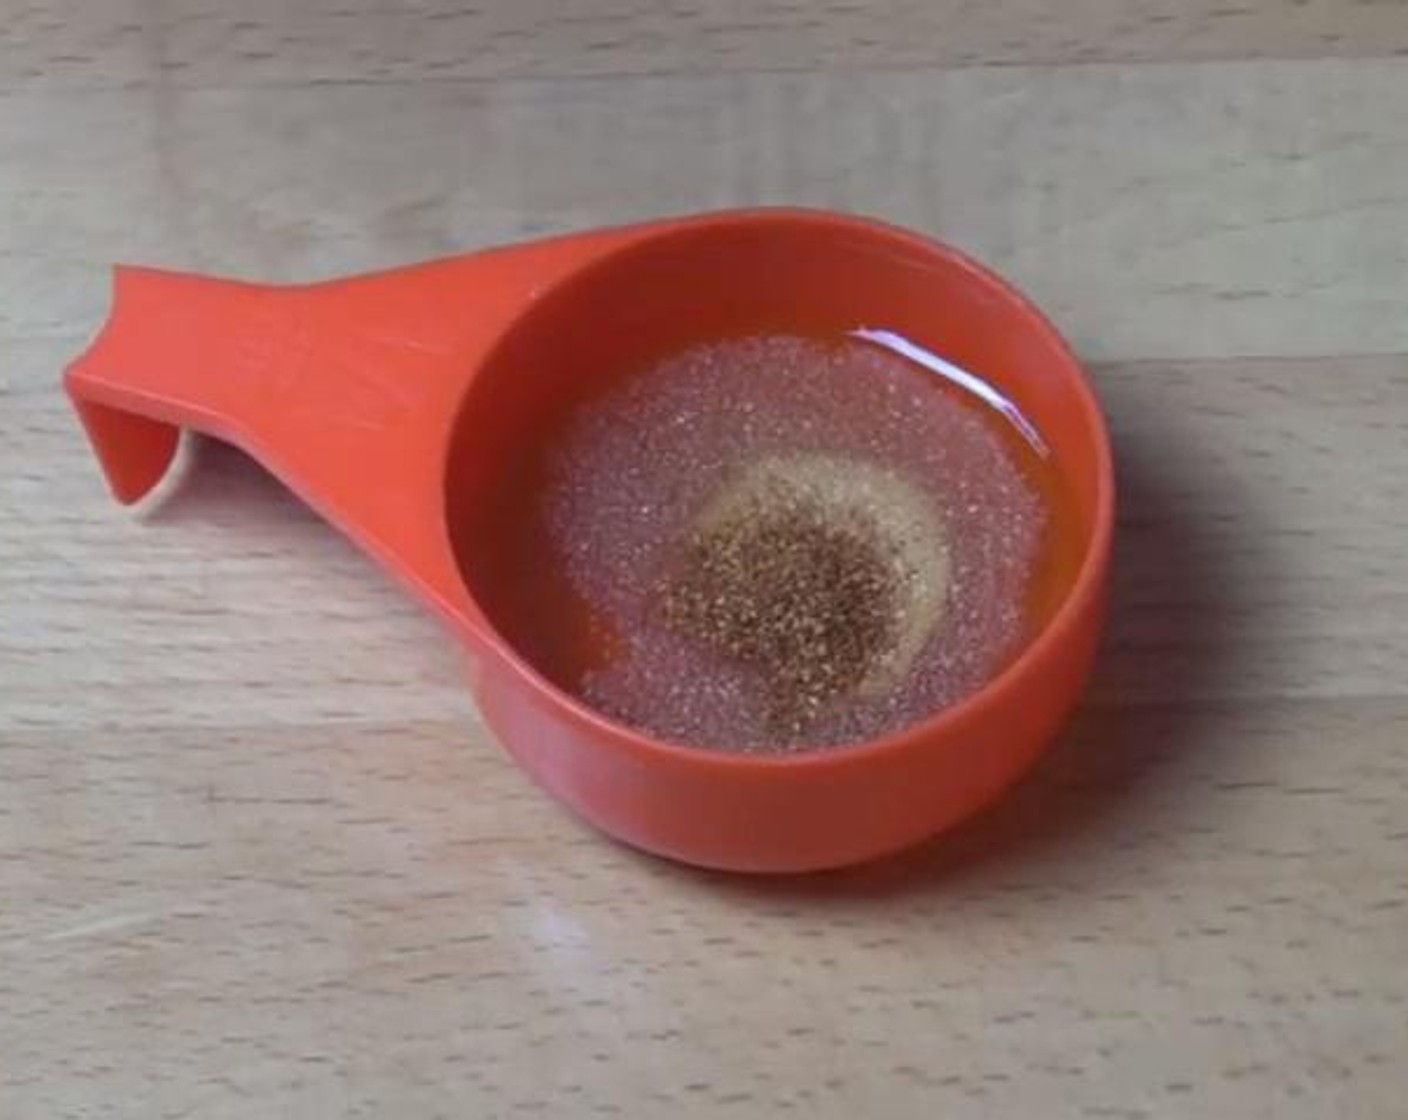 step 2 Inside a mixing cup, mix together the Olive Oil (2 Tbsp), Garlic Powder (1/2 tsp), and Cayenne Pepper (1 pinch).